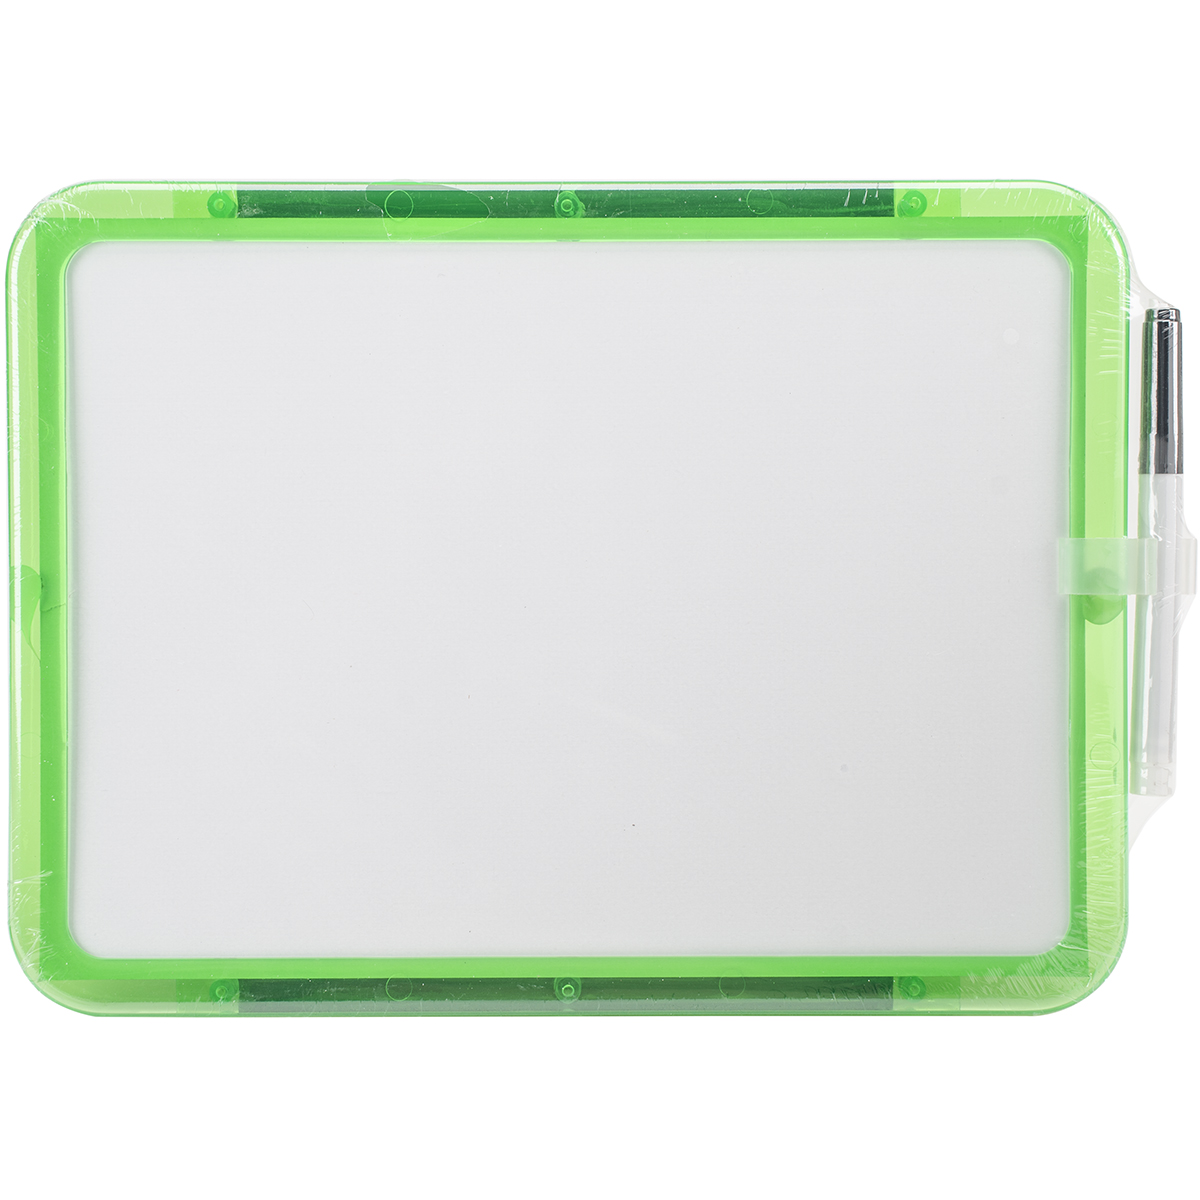 11.4 X 8.5 In. Dry Erase Board With Marker